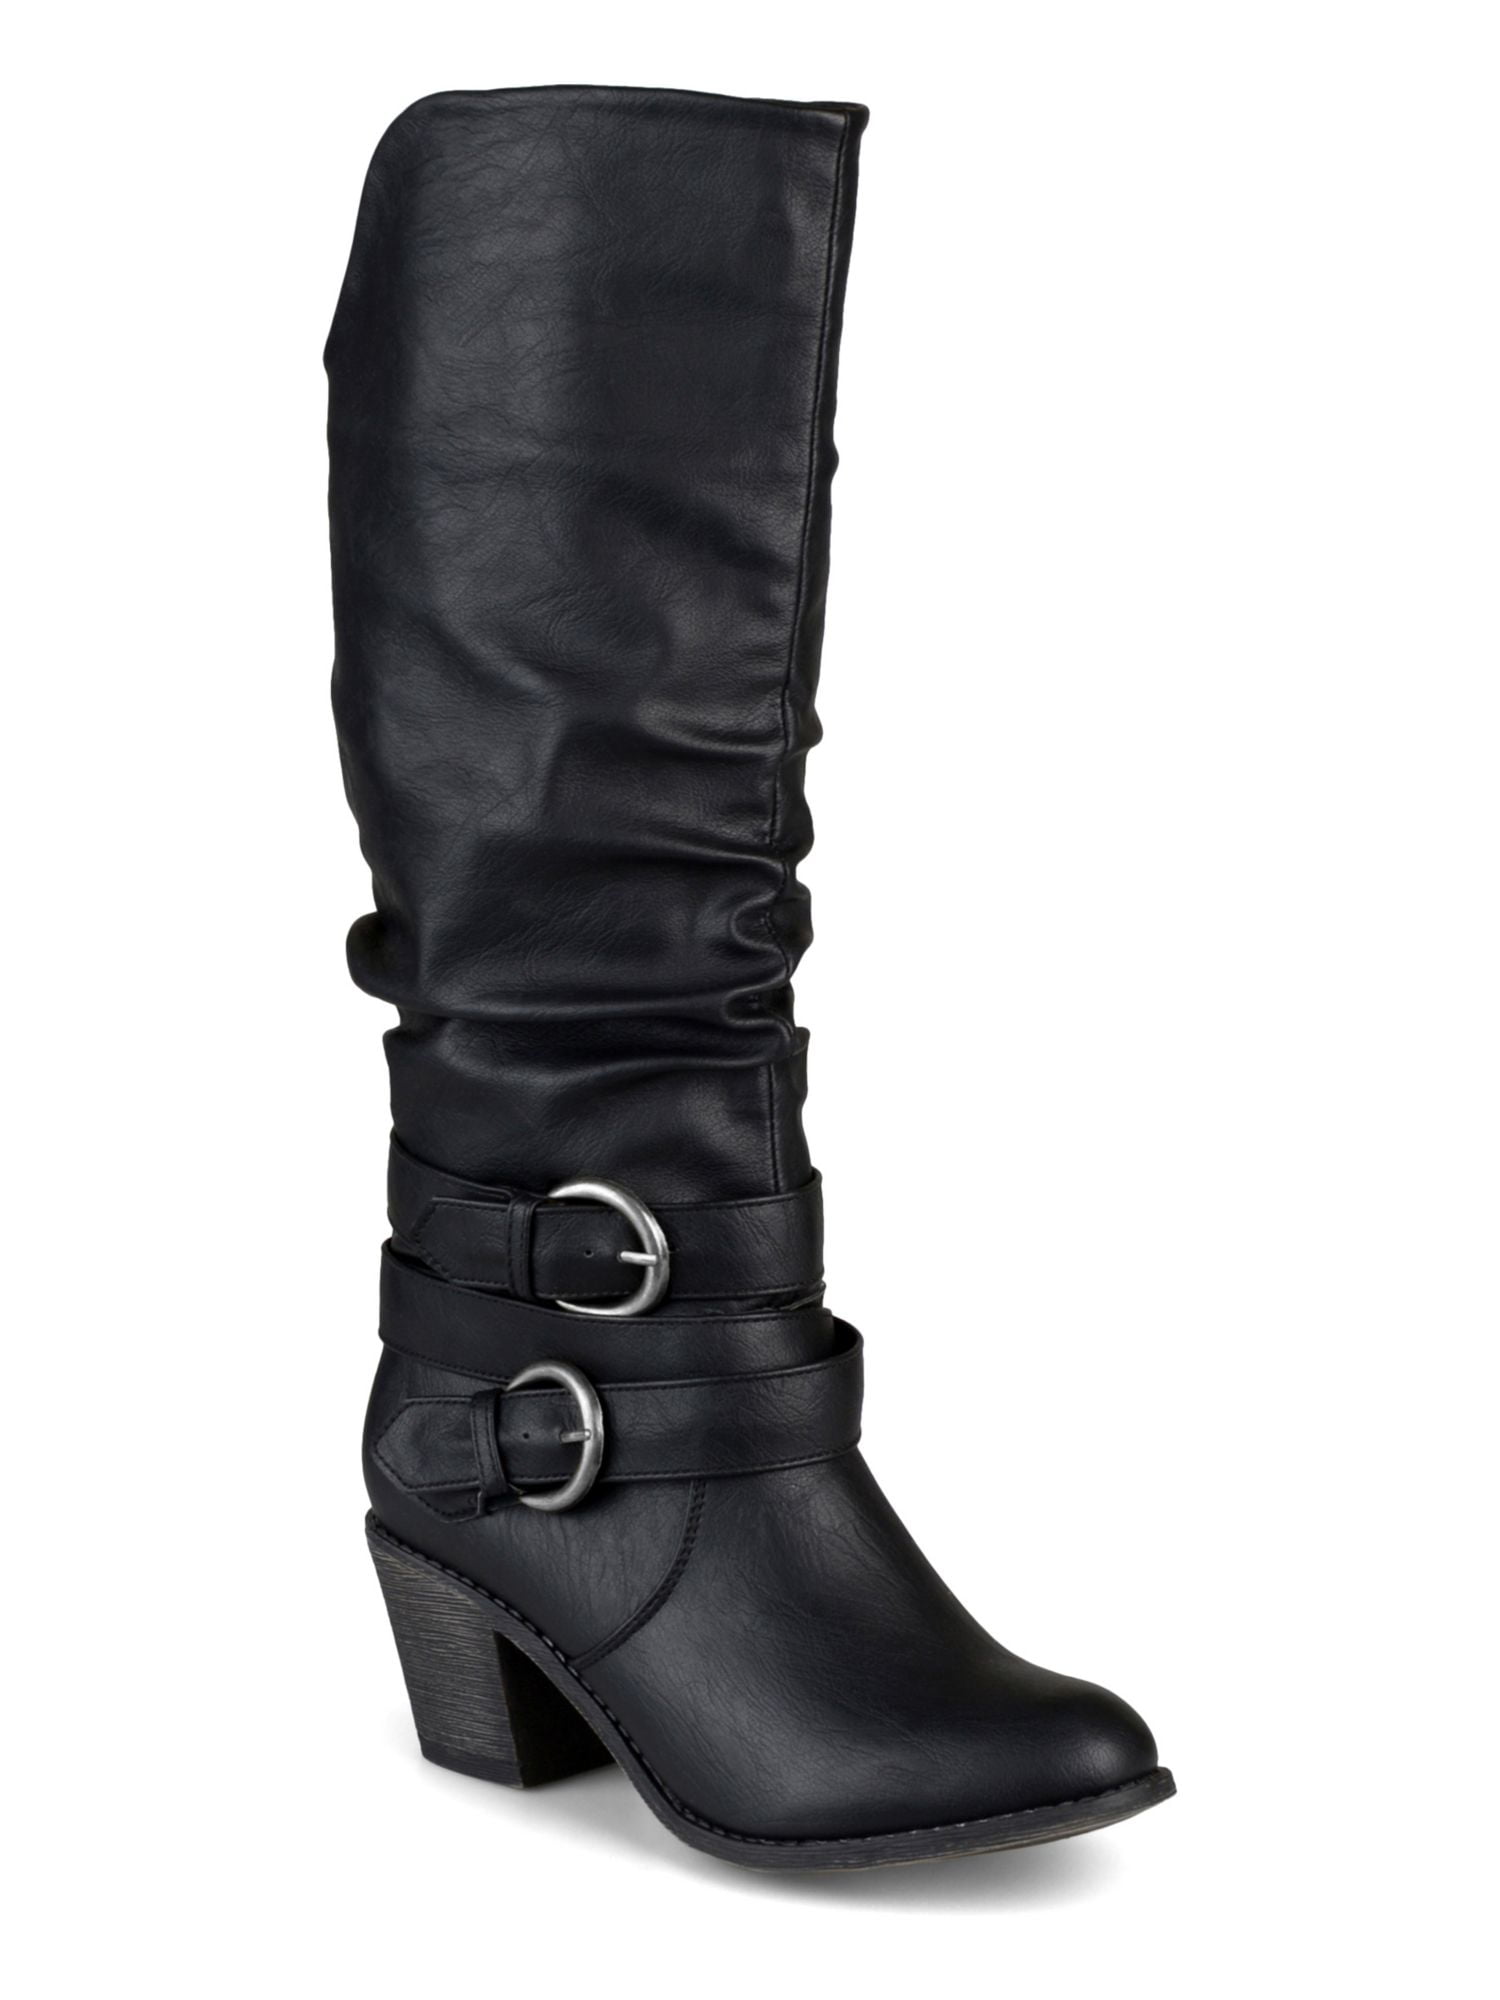 Vera Black Mid-Calf Slouch Boots | Boots, Brown boots outfit, Slouched boots